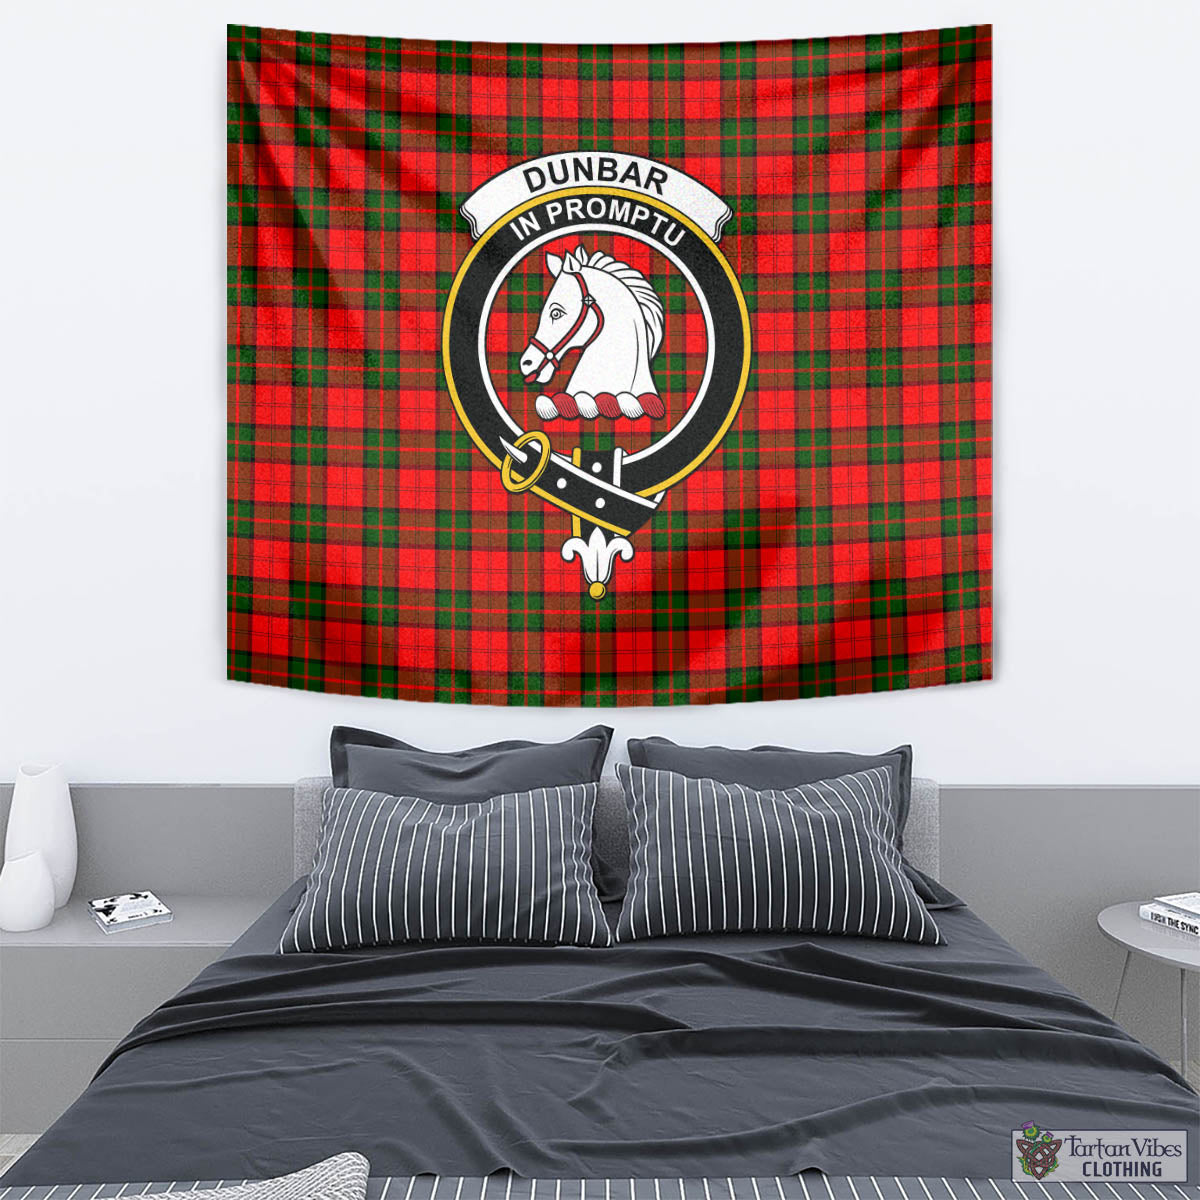 Tartan Vibes Clothing Dunbar Modern Tartan Tapestry Wall Hanging and Home Decor for Room with Family Crest